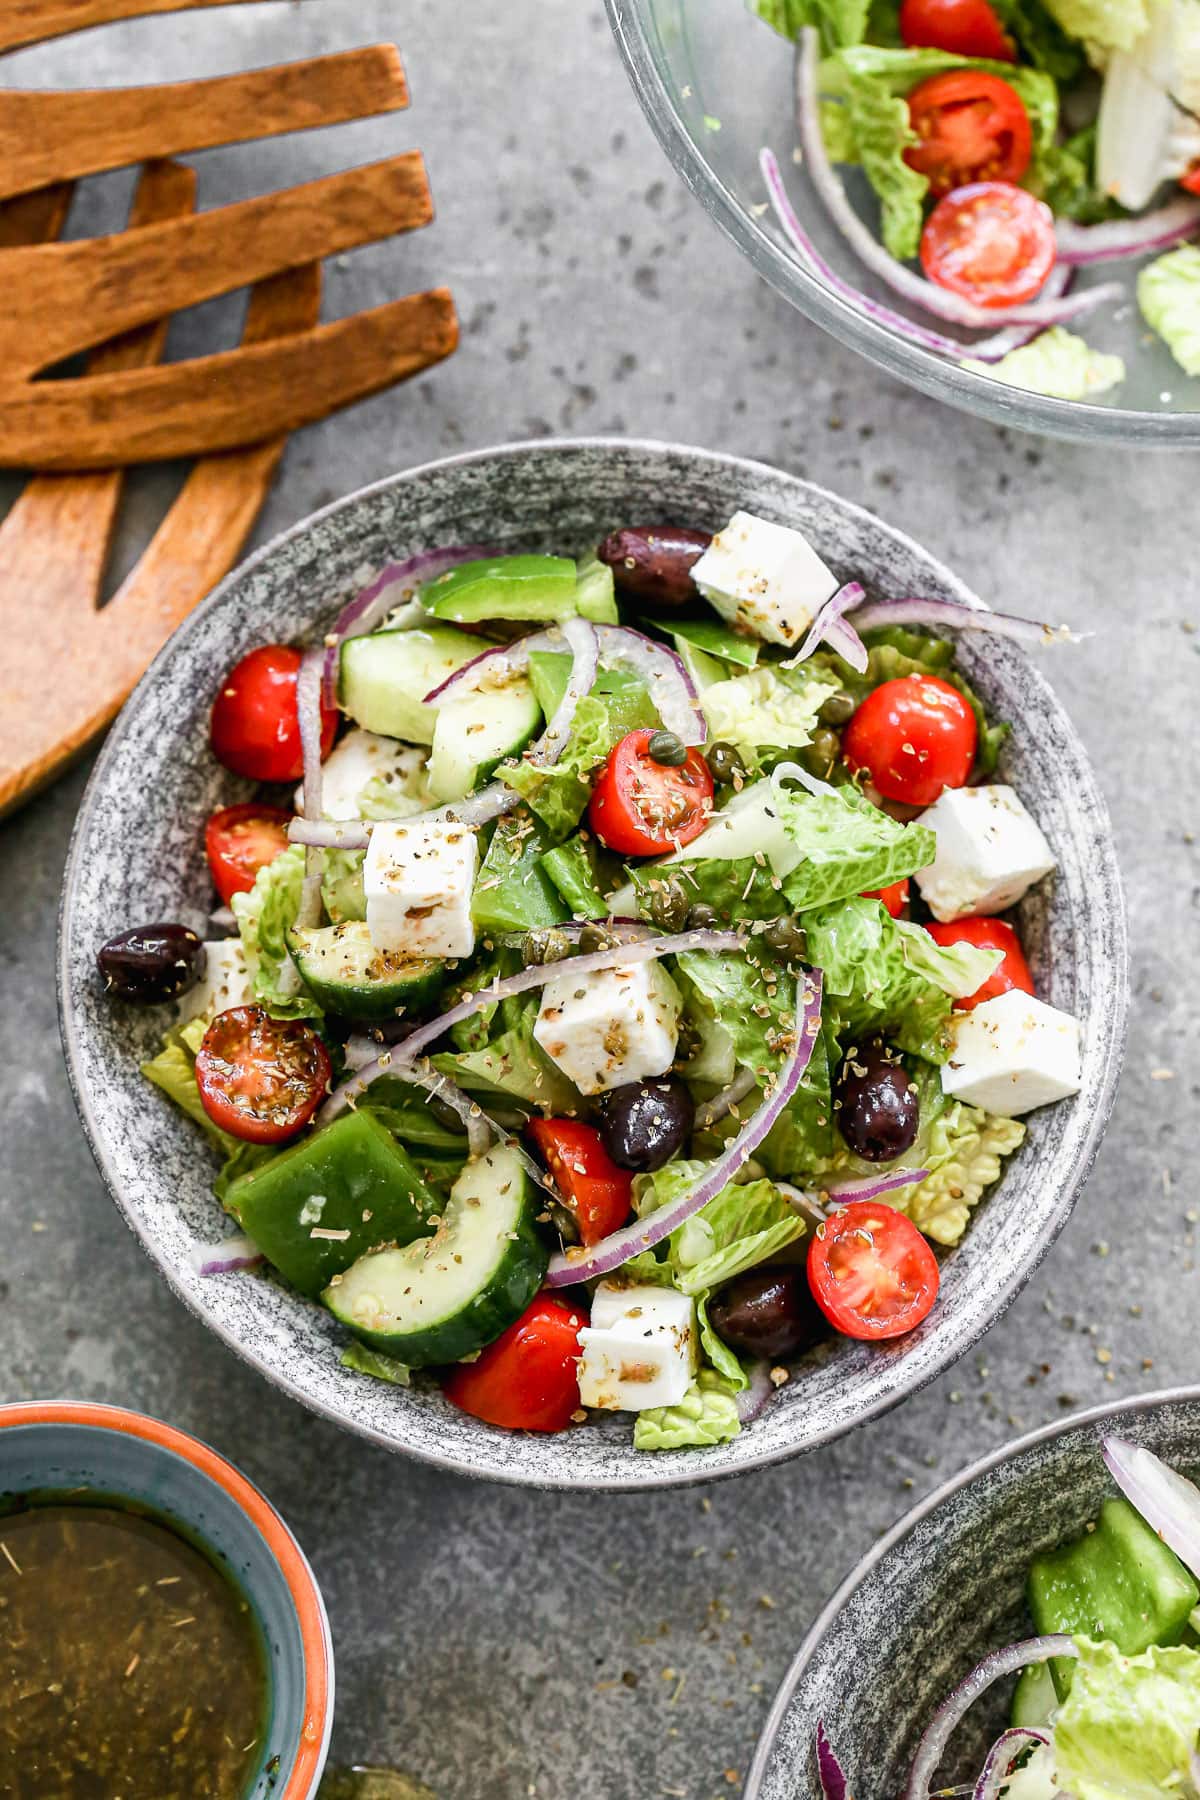 A bowl of Greek salad with lettuce